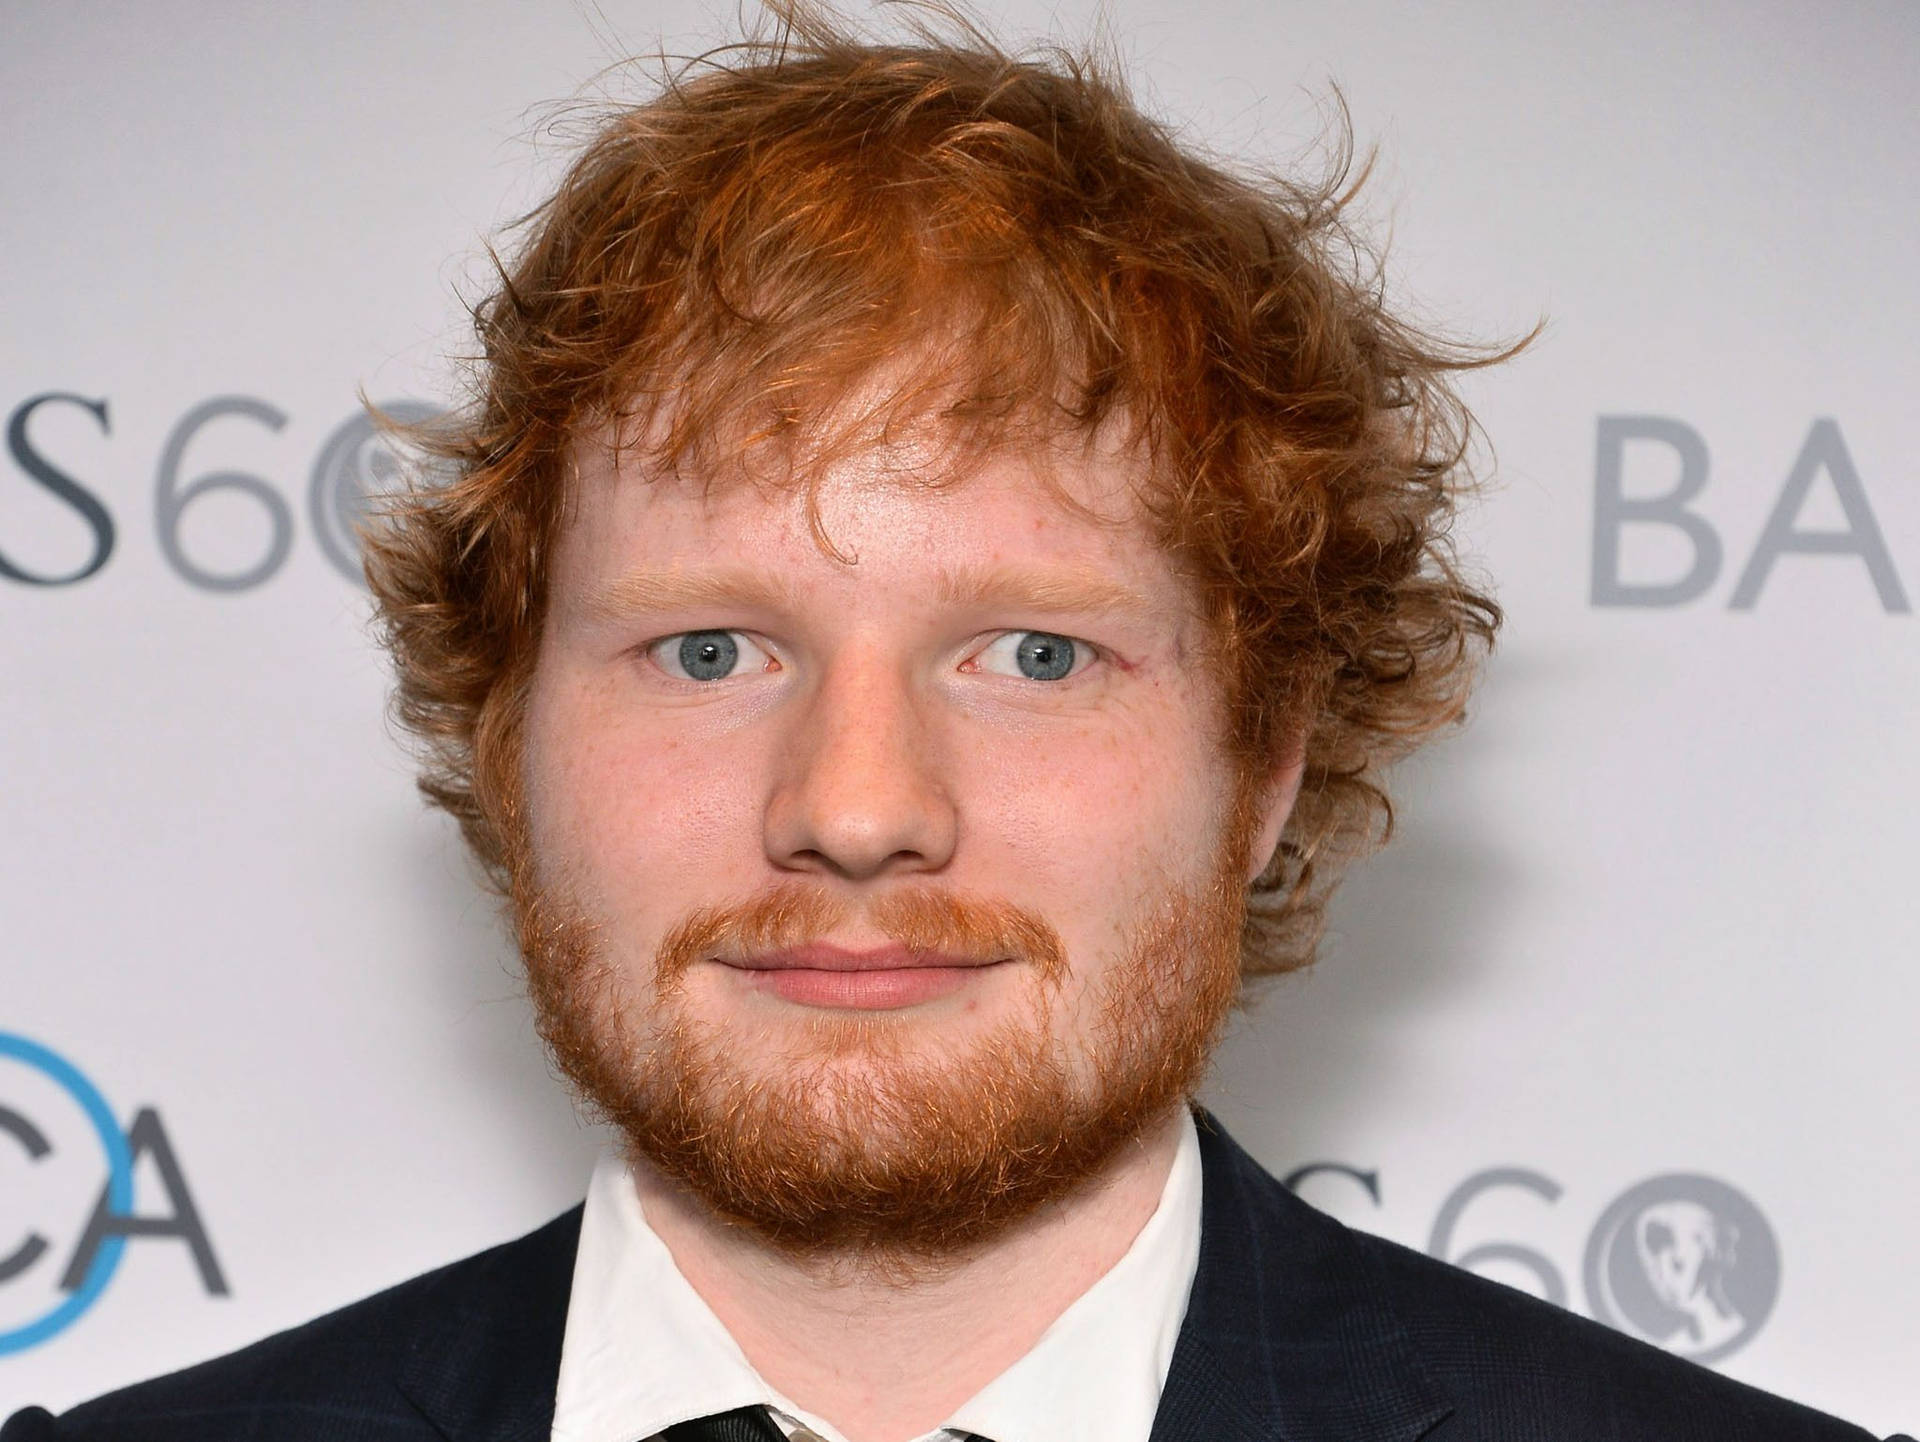 Ed Sheeran Struts The Red Carpet In Style Background